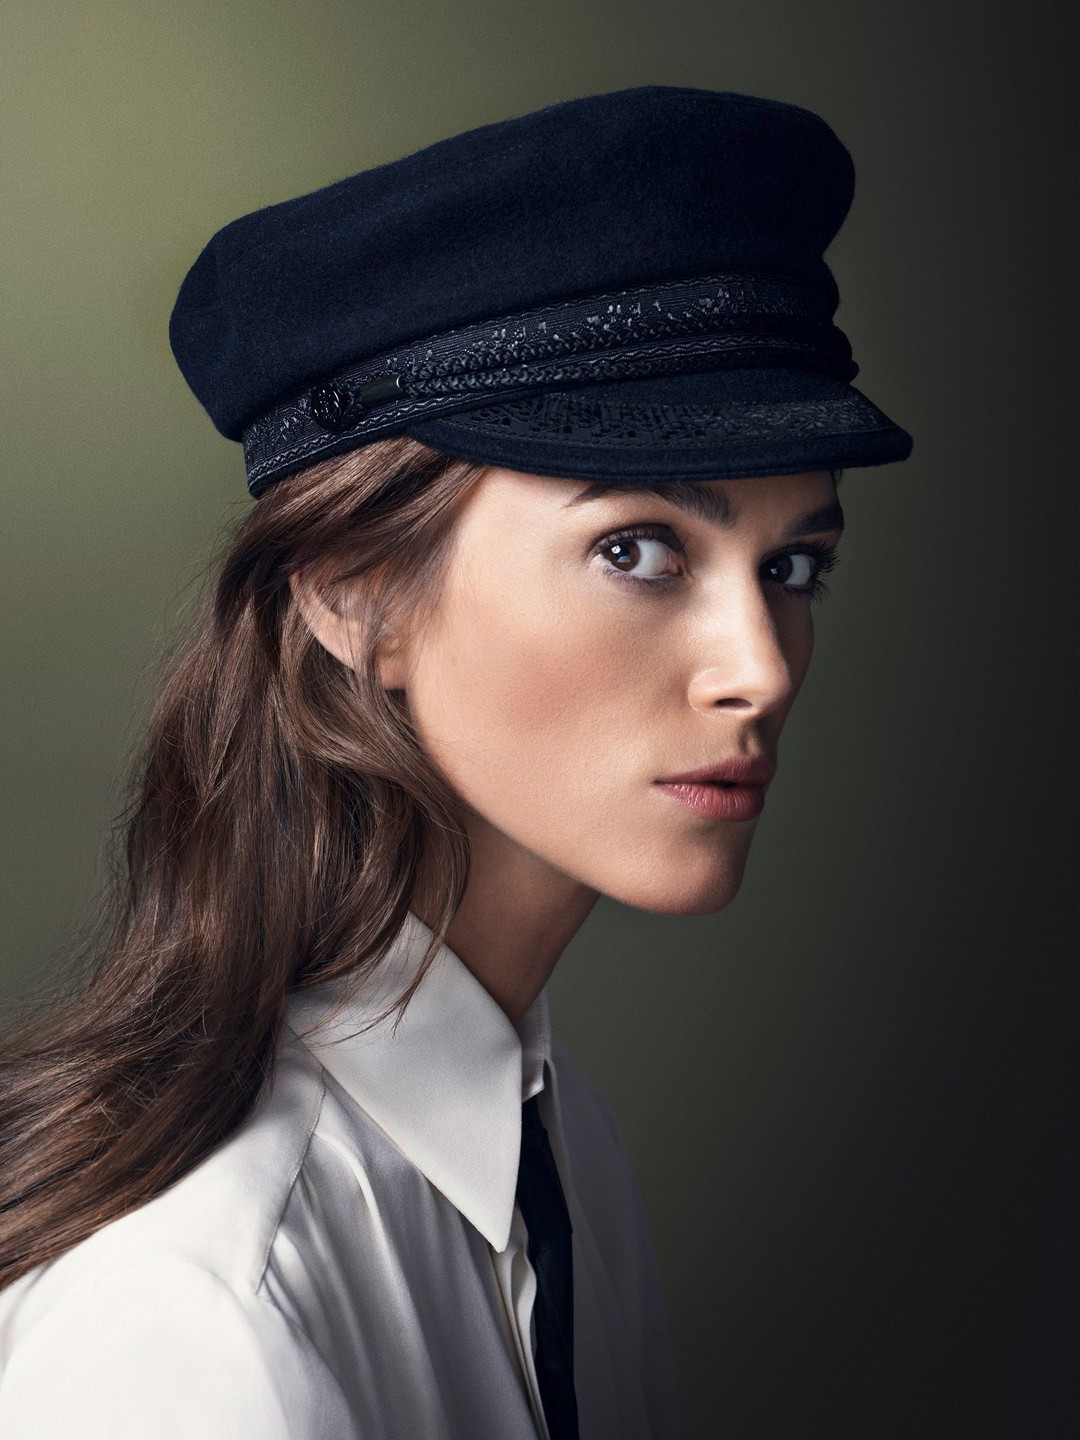 Keira Knightley, Actress, Looking At Viewer, Portrait Wallpaper